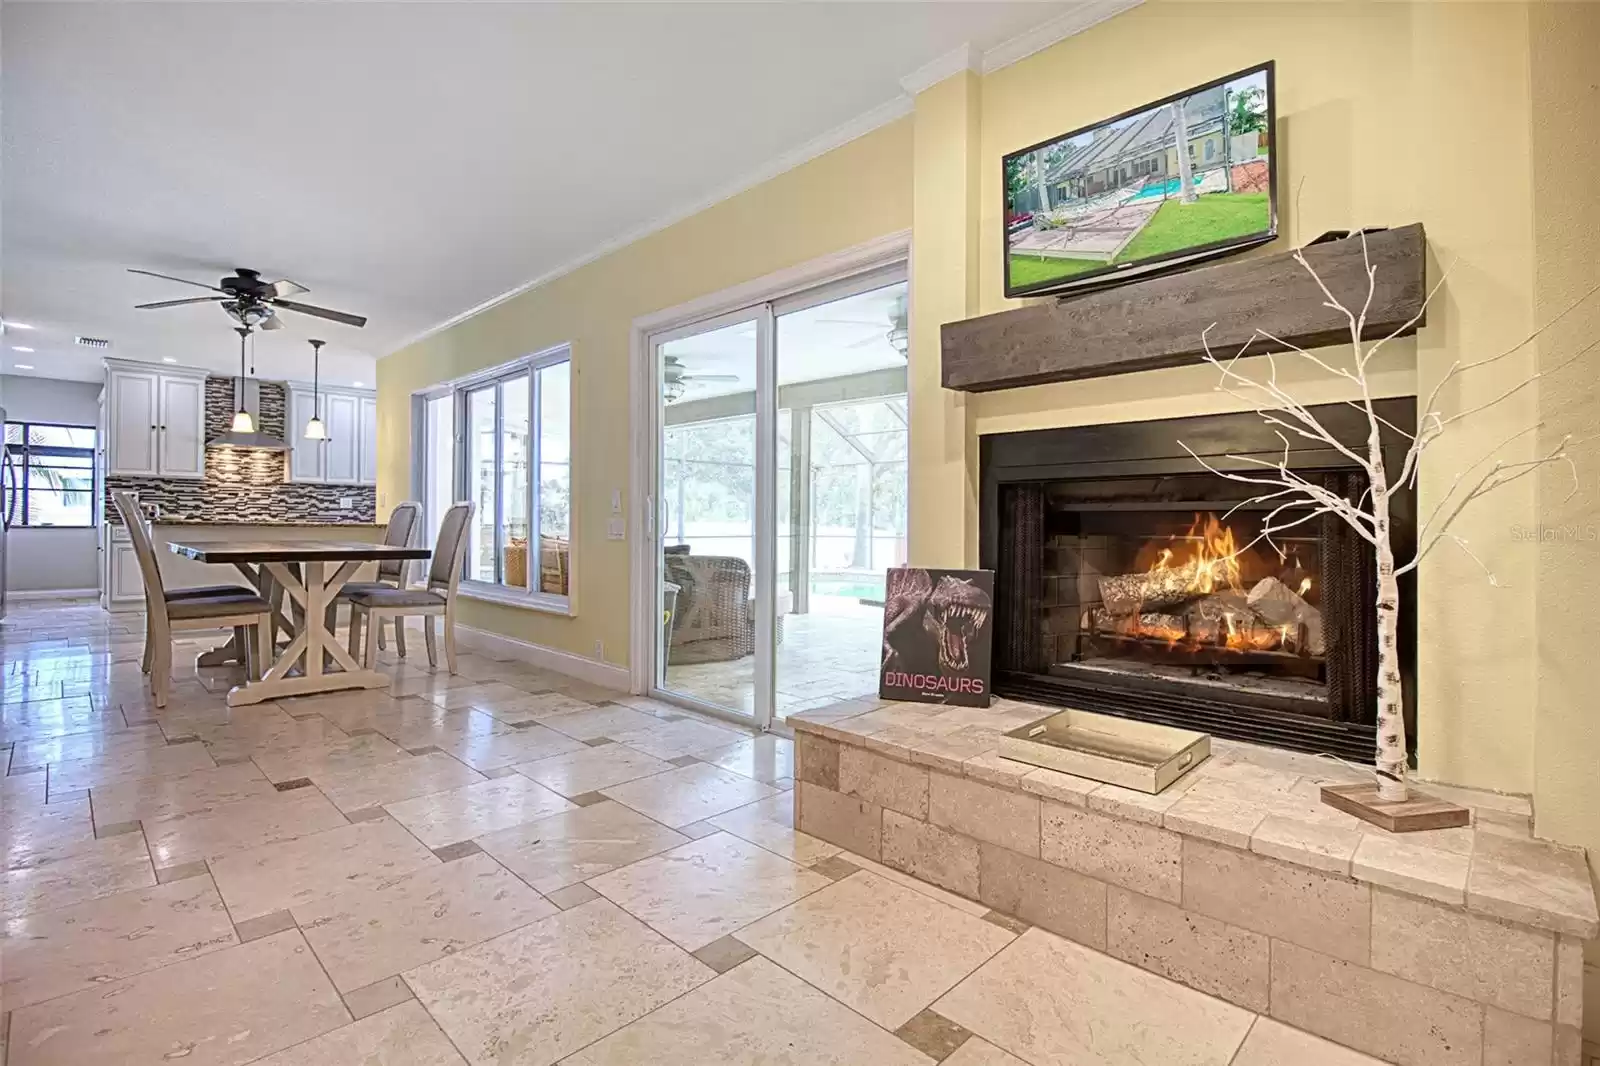 Majestic wood burning fireplace in the family room